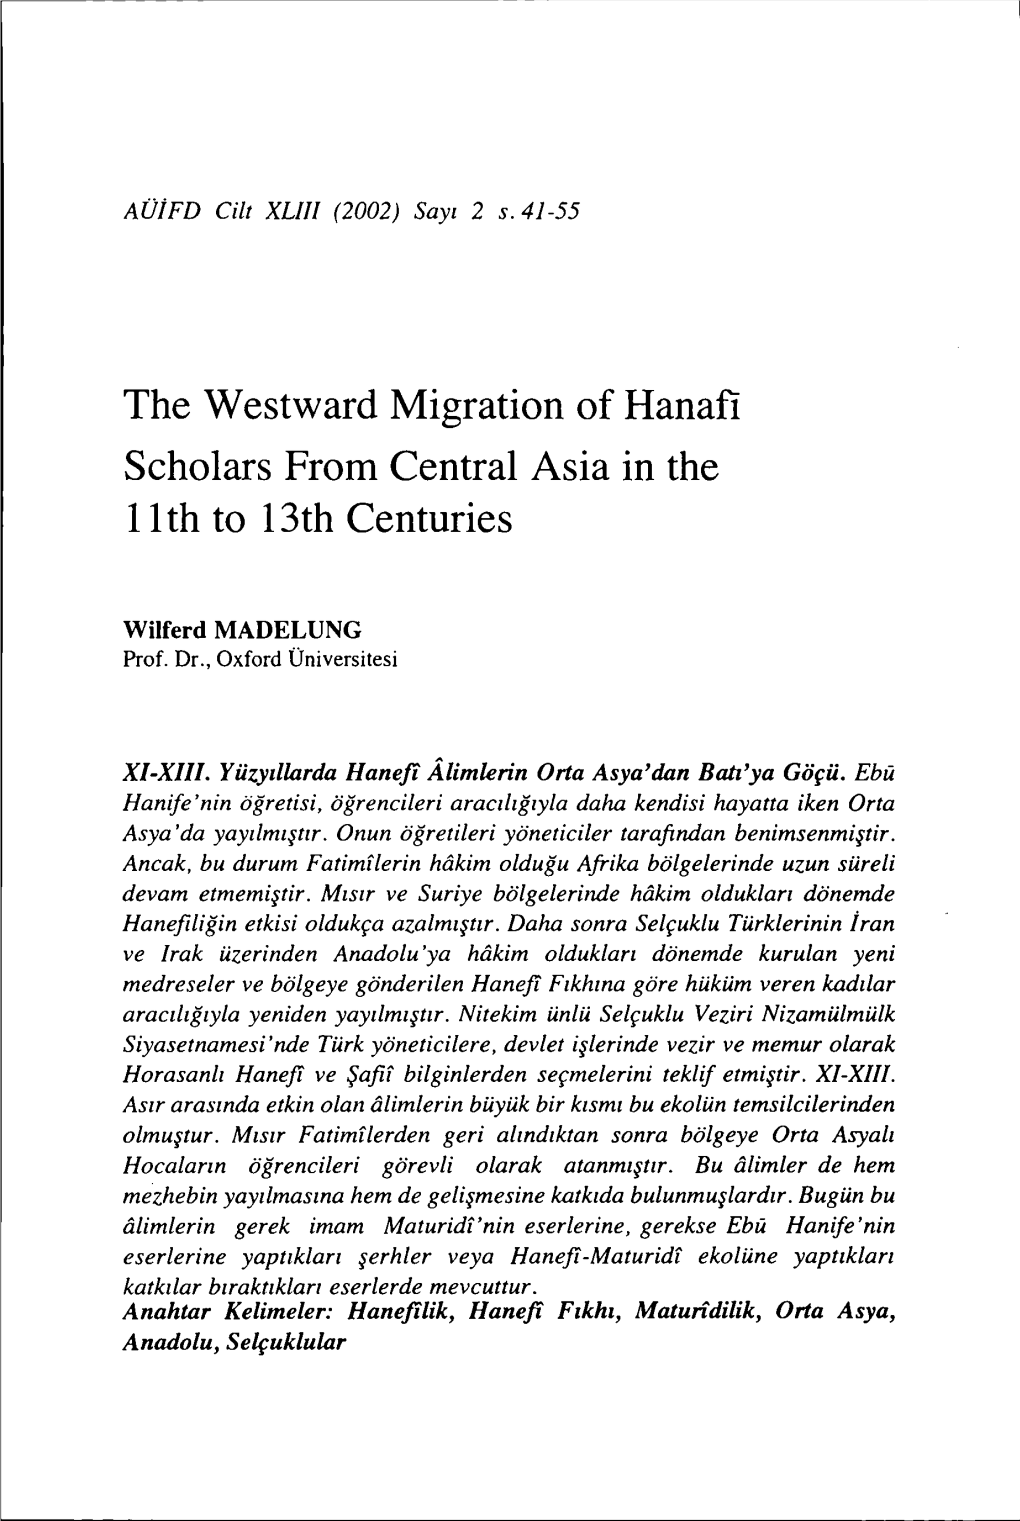 The Westward Migration of Ranafi Scholars from Central Asia in the 11Th to 13Th Centuries